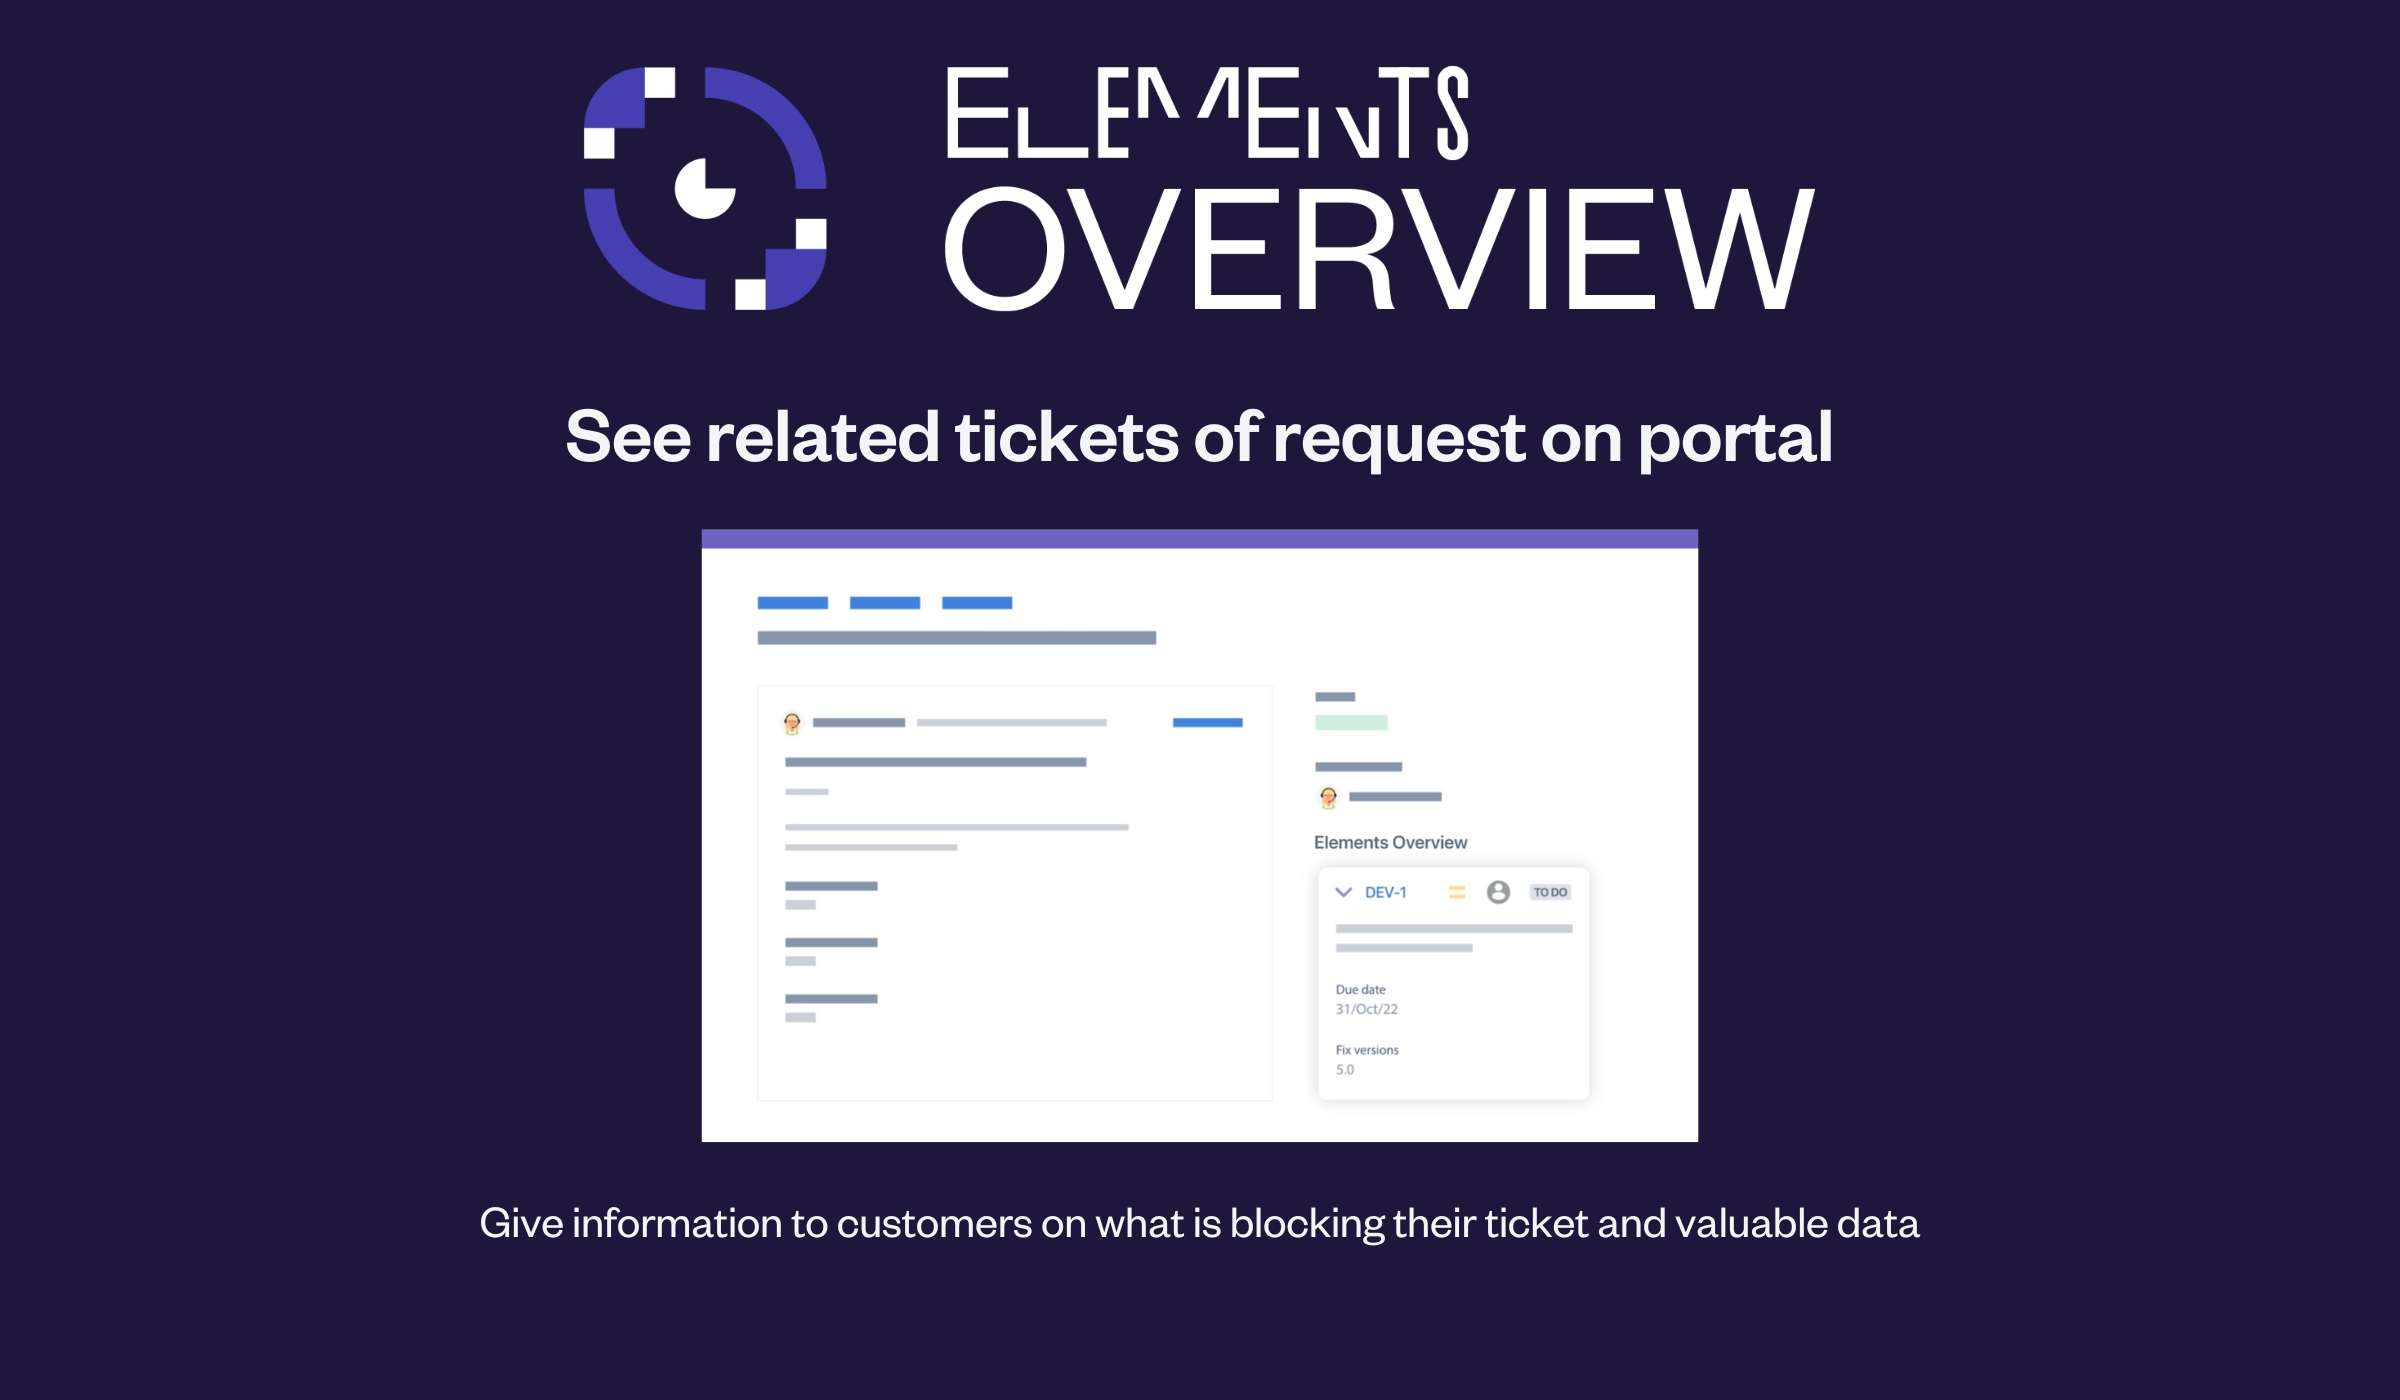 Customers on Jira Service Management portal might lack key information on related tickets to their request, like bugs, change requests, or escalated issues. Use Elements Overview to provide them with this data and improve customer relationship. 